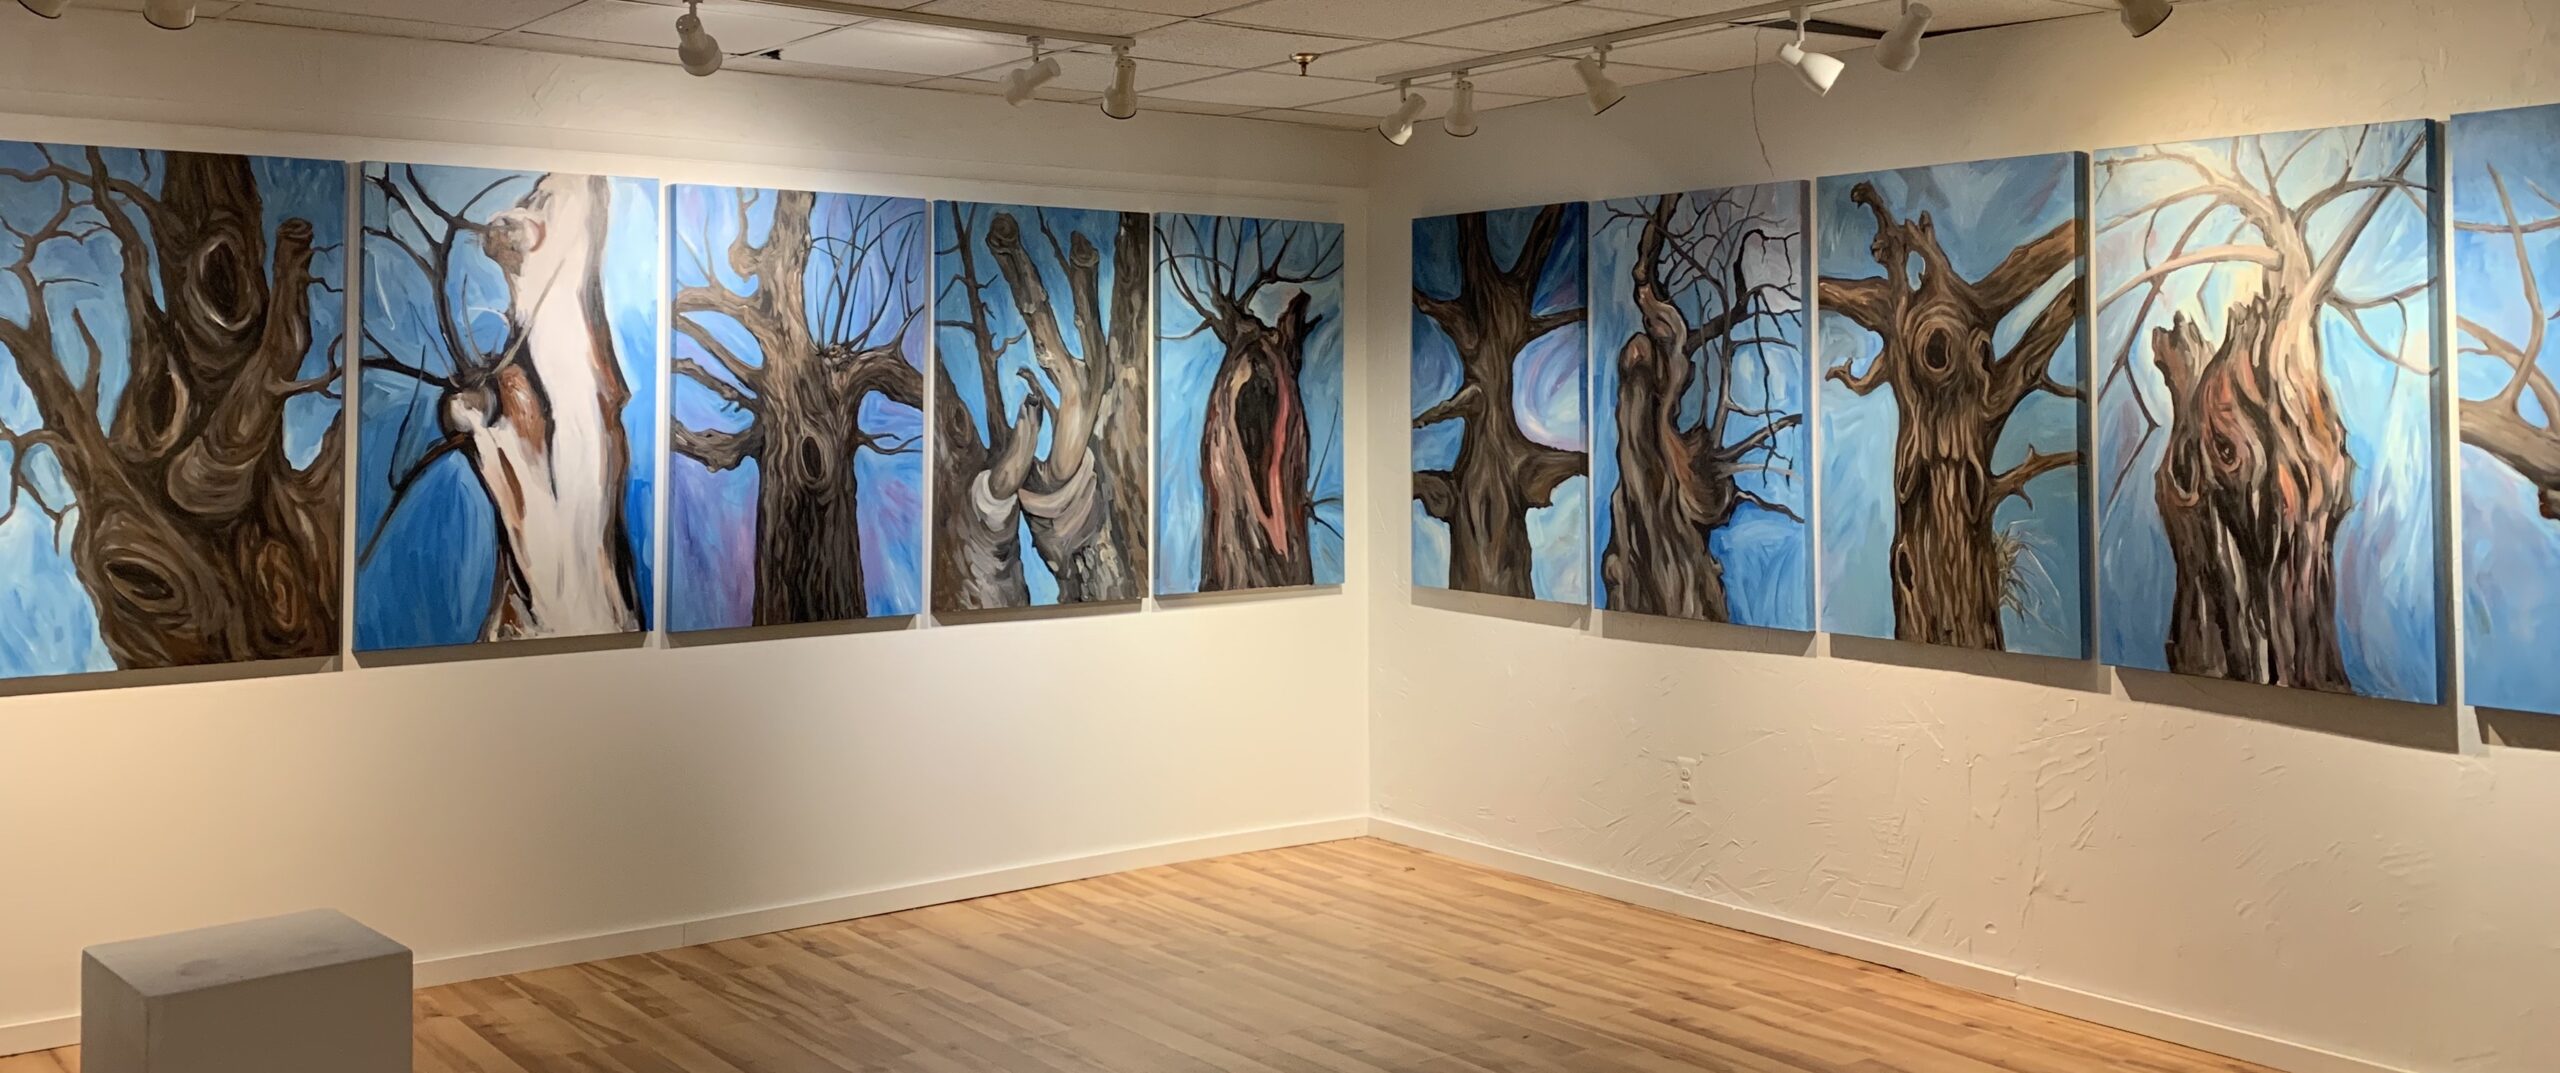 “12 Trees, Plus...” an art exhibition by Mary Vollero - up at the AAGD in August August 5, 2020